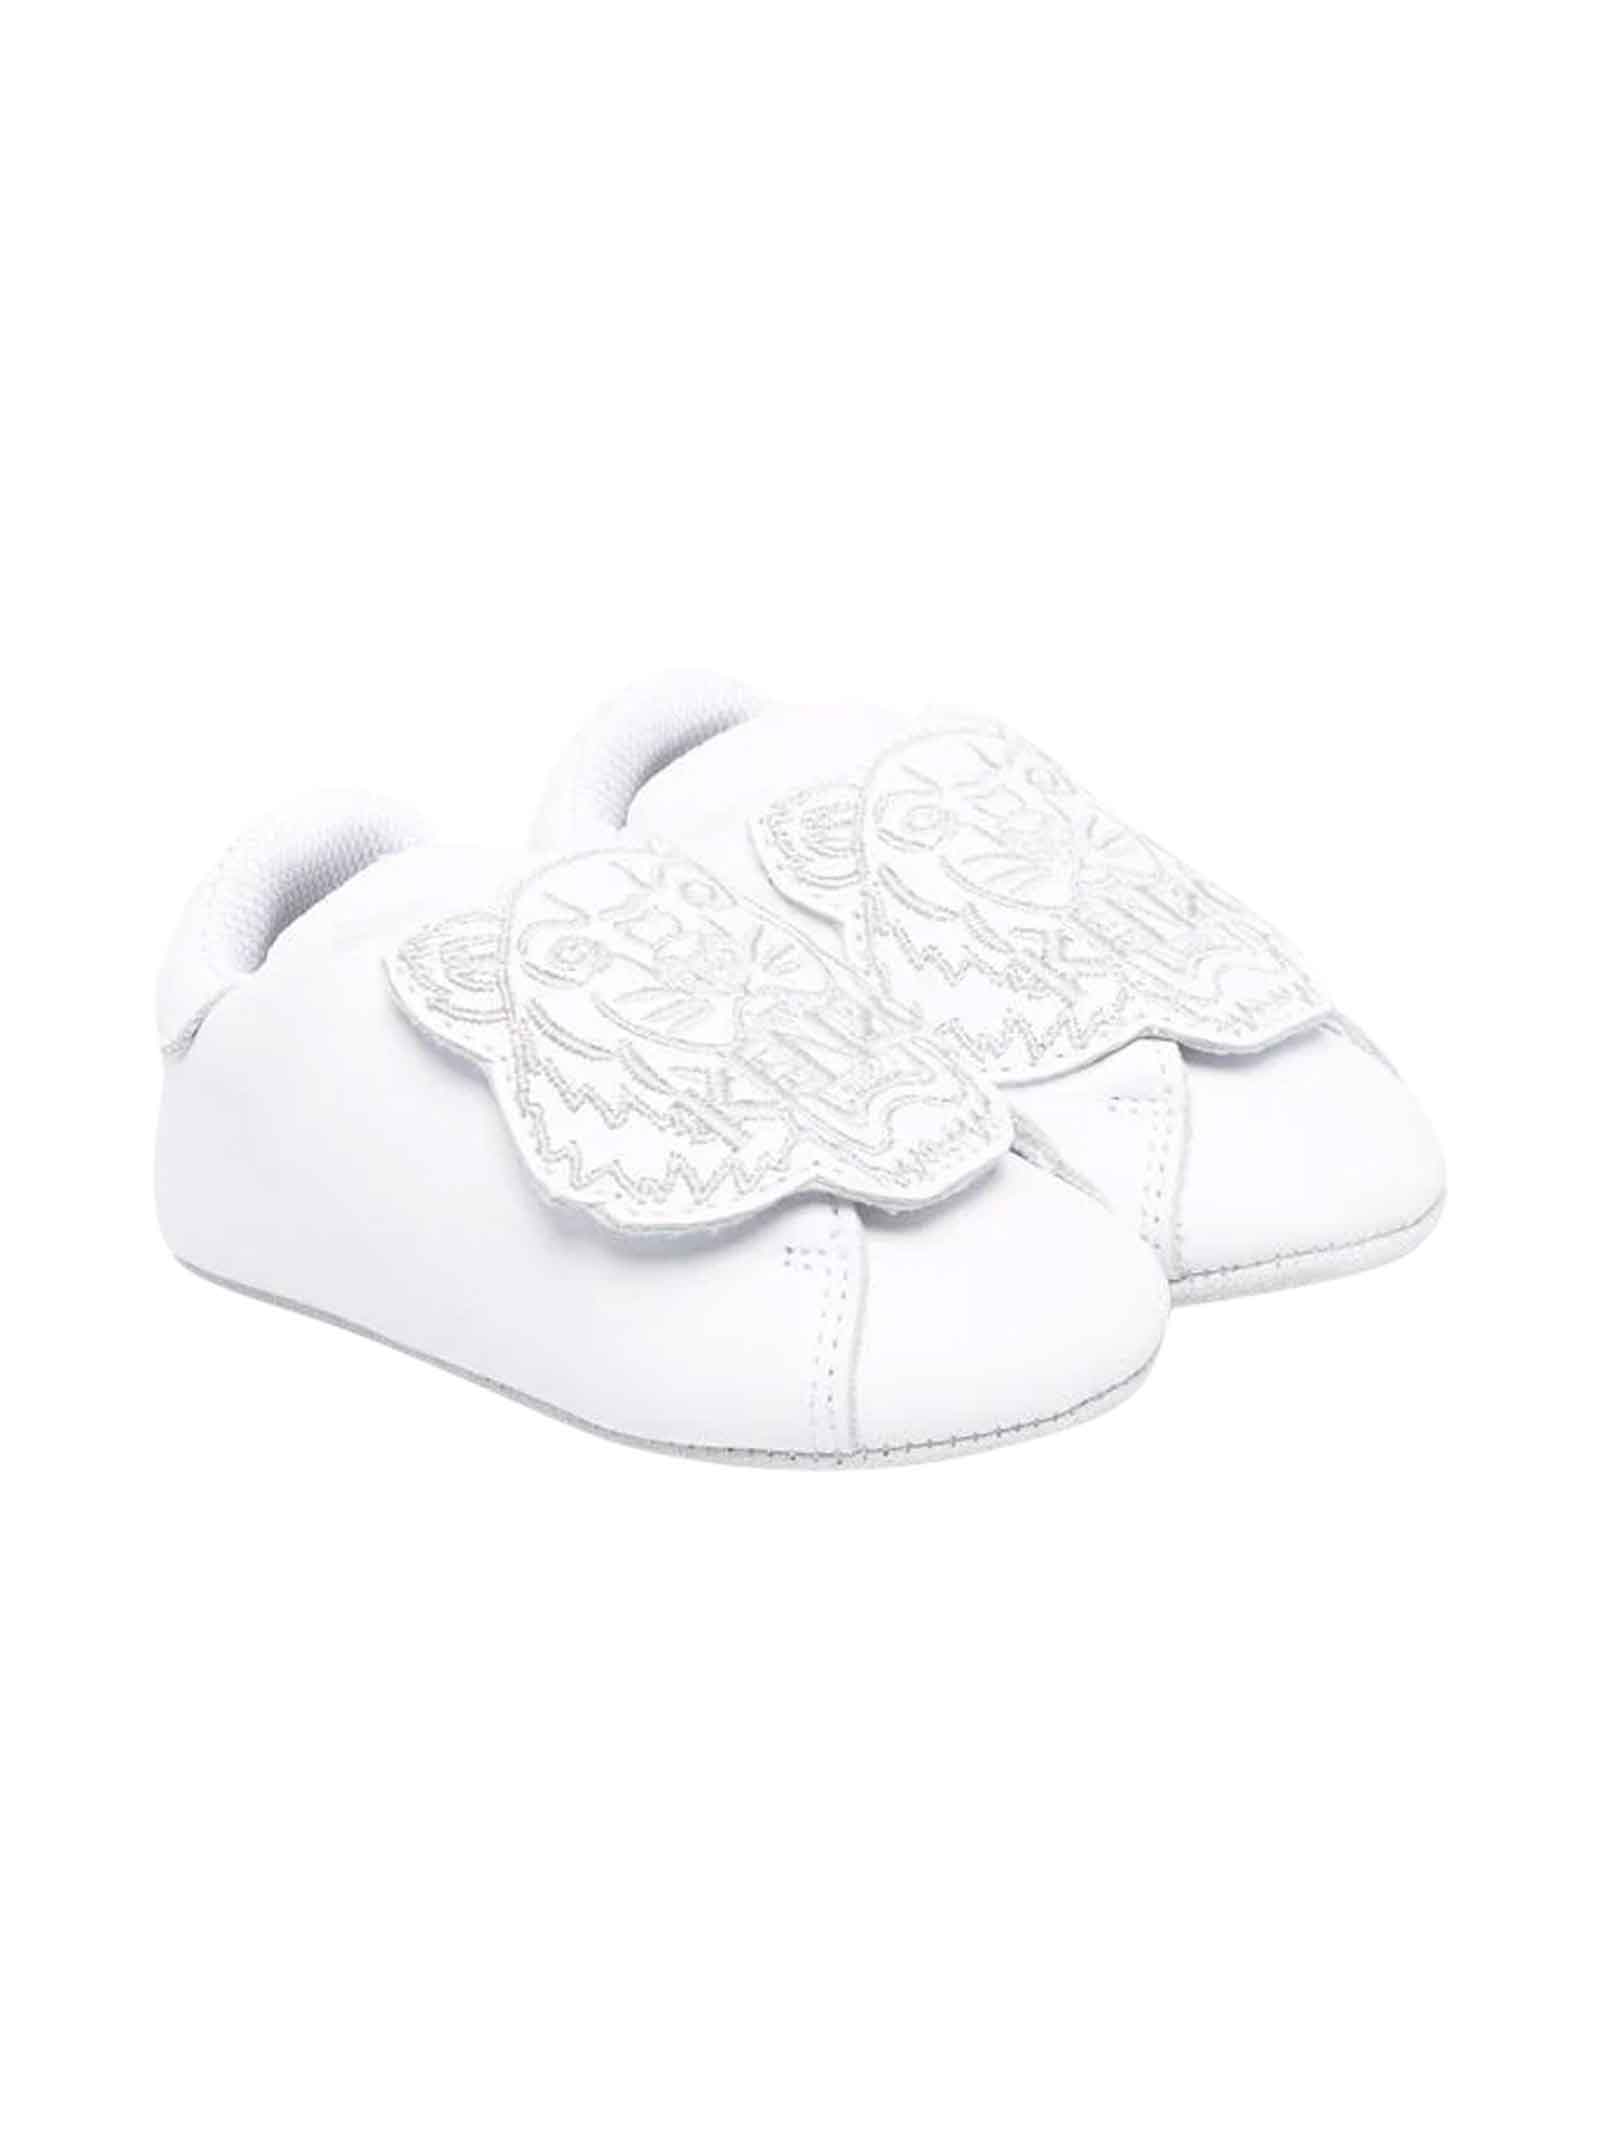 Kenzo Kids White Baby Shoes With Tiger Head Application, Front Closure With Strap By.